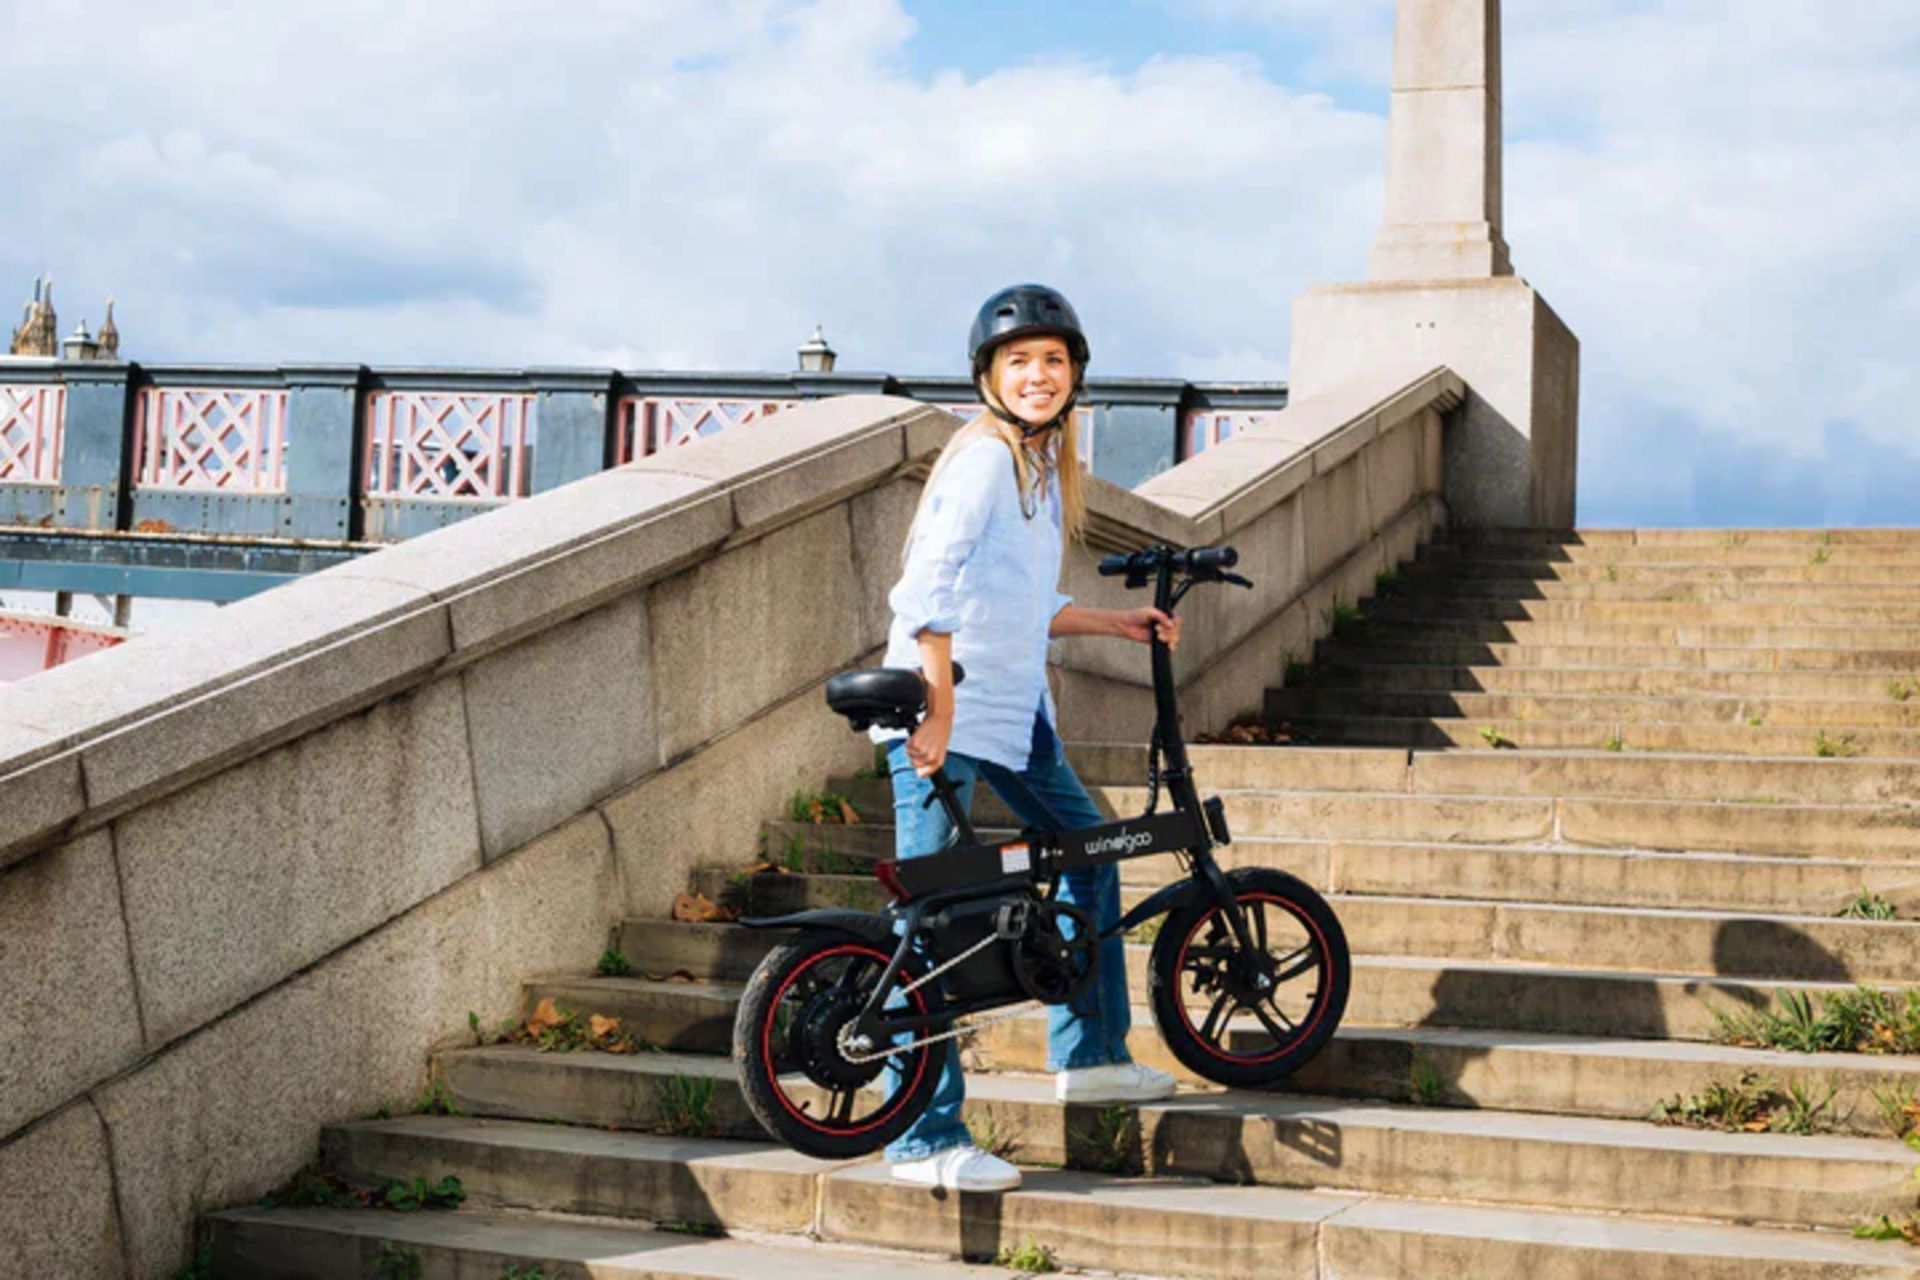 BRAND NEW Windgoo B20 Pro Electric Bike. RRP £1,100.99. With 16-inch-wide tires and a frame of - Image 3 of 6